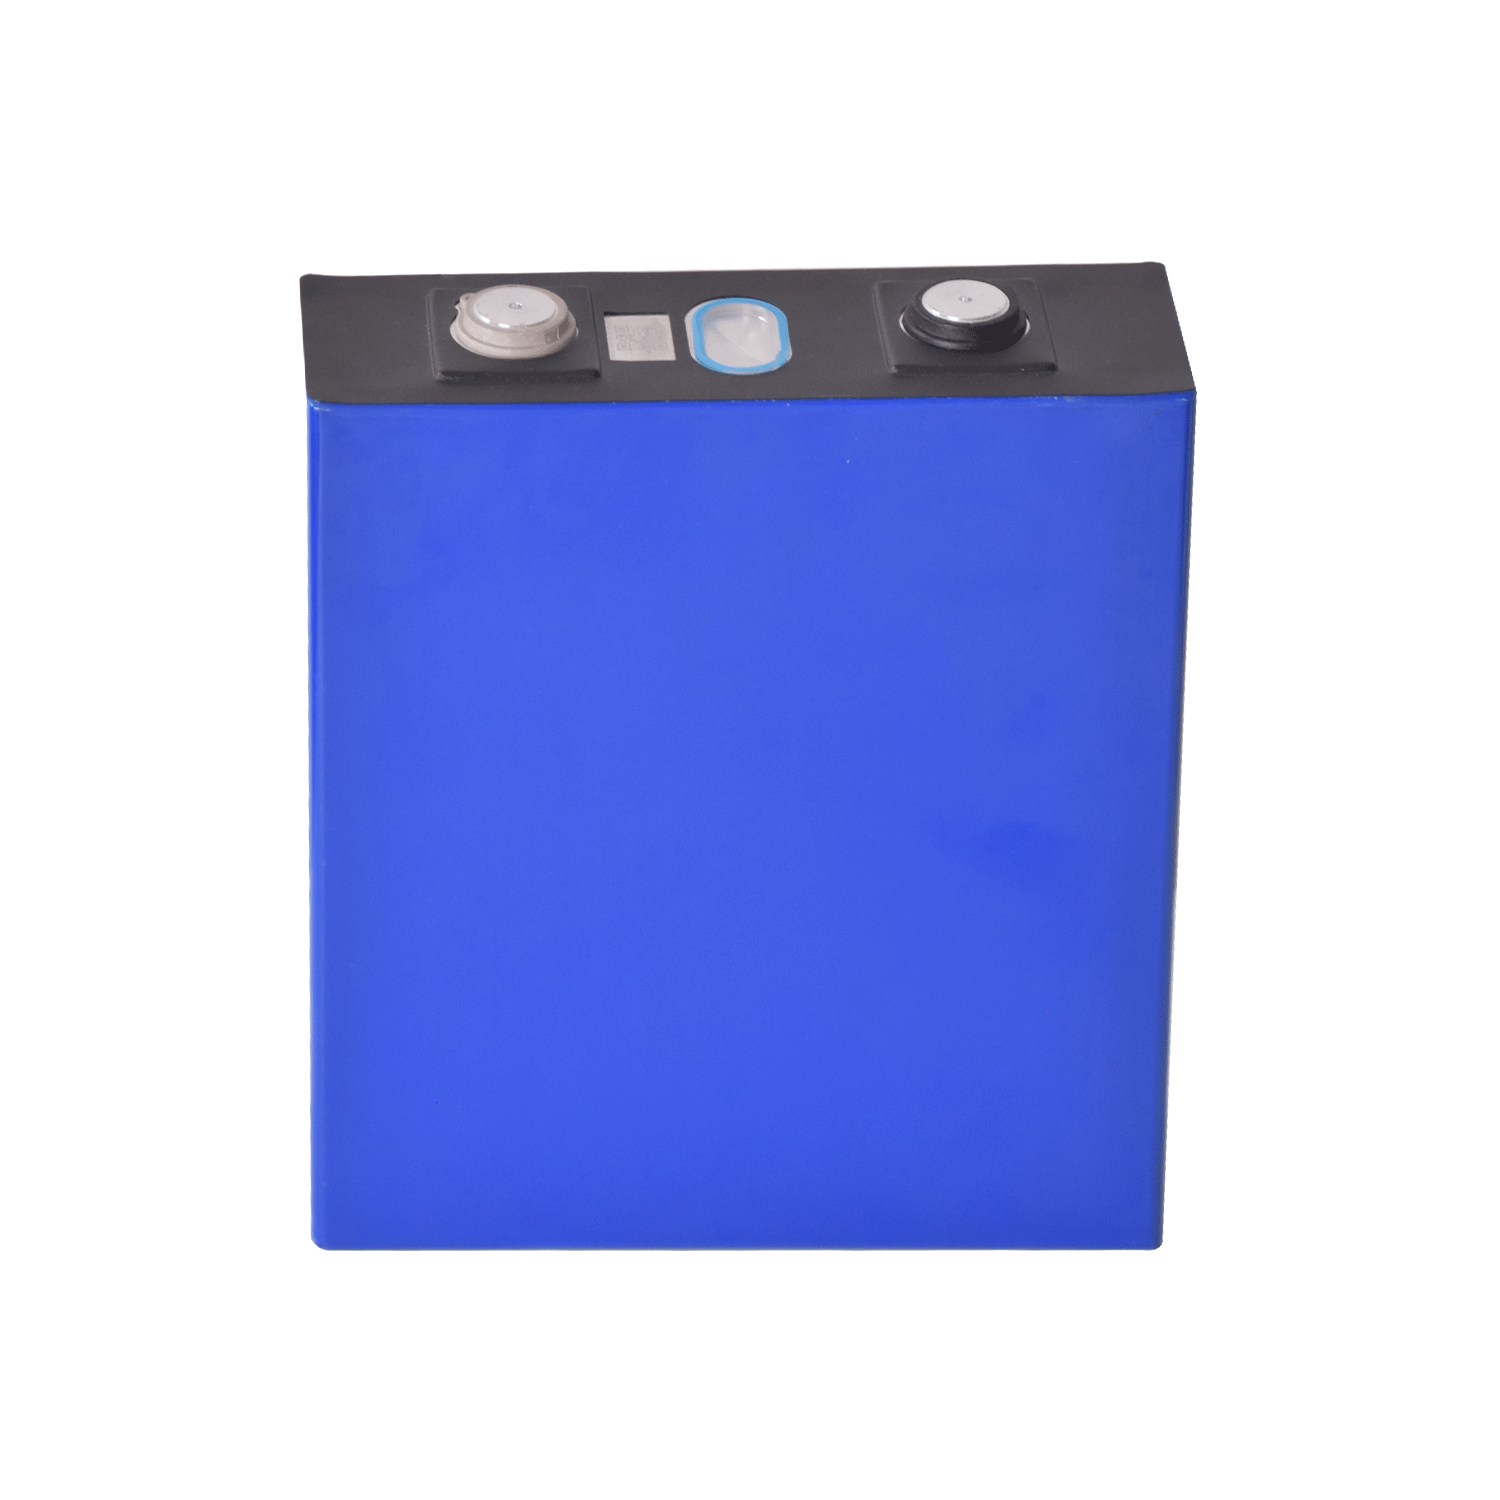 odm lithium ion battery solar charger manufacturer